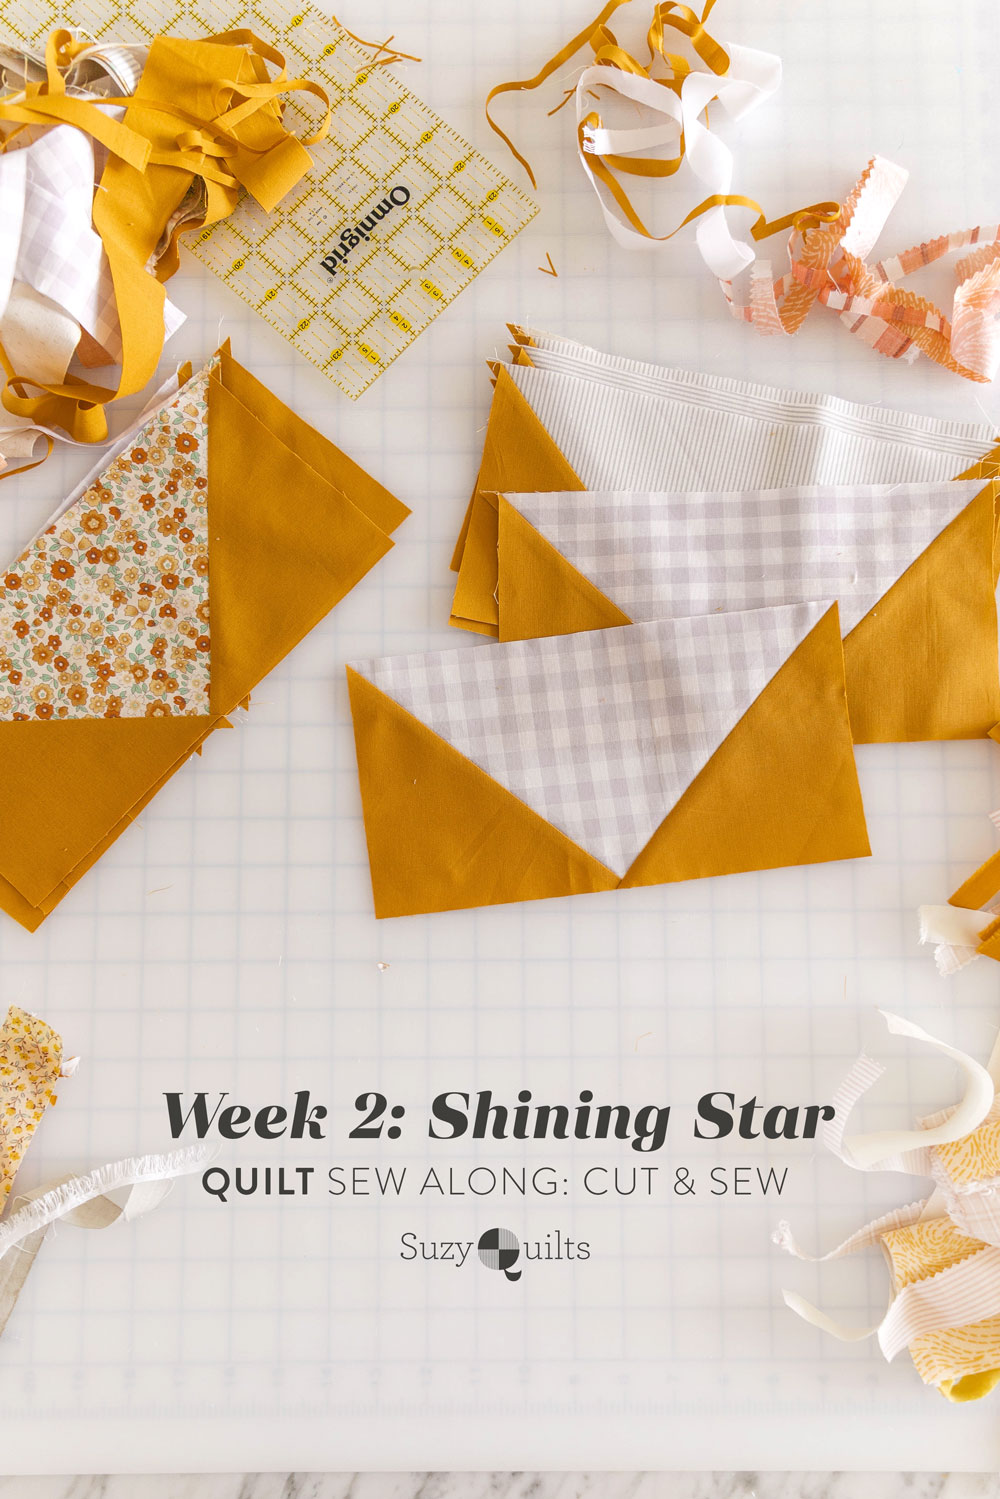 In week 2 of the Shining Star quilt sew along we cut into our fabric and sew the flying geese blocks. Watch the video tutorial for tips! suzyquilts.com